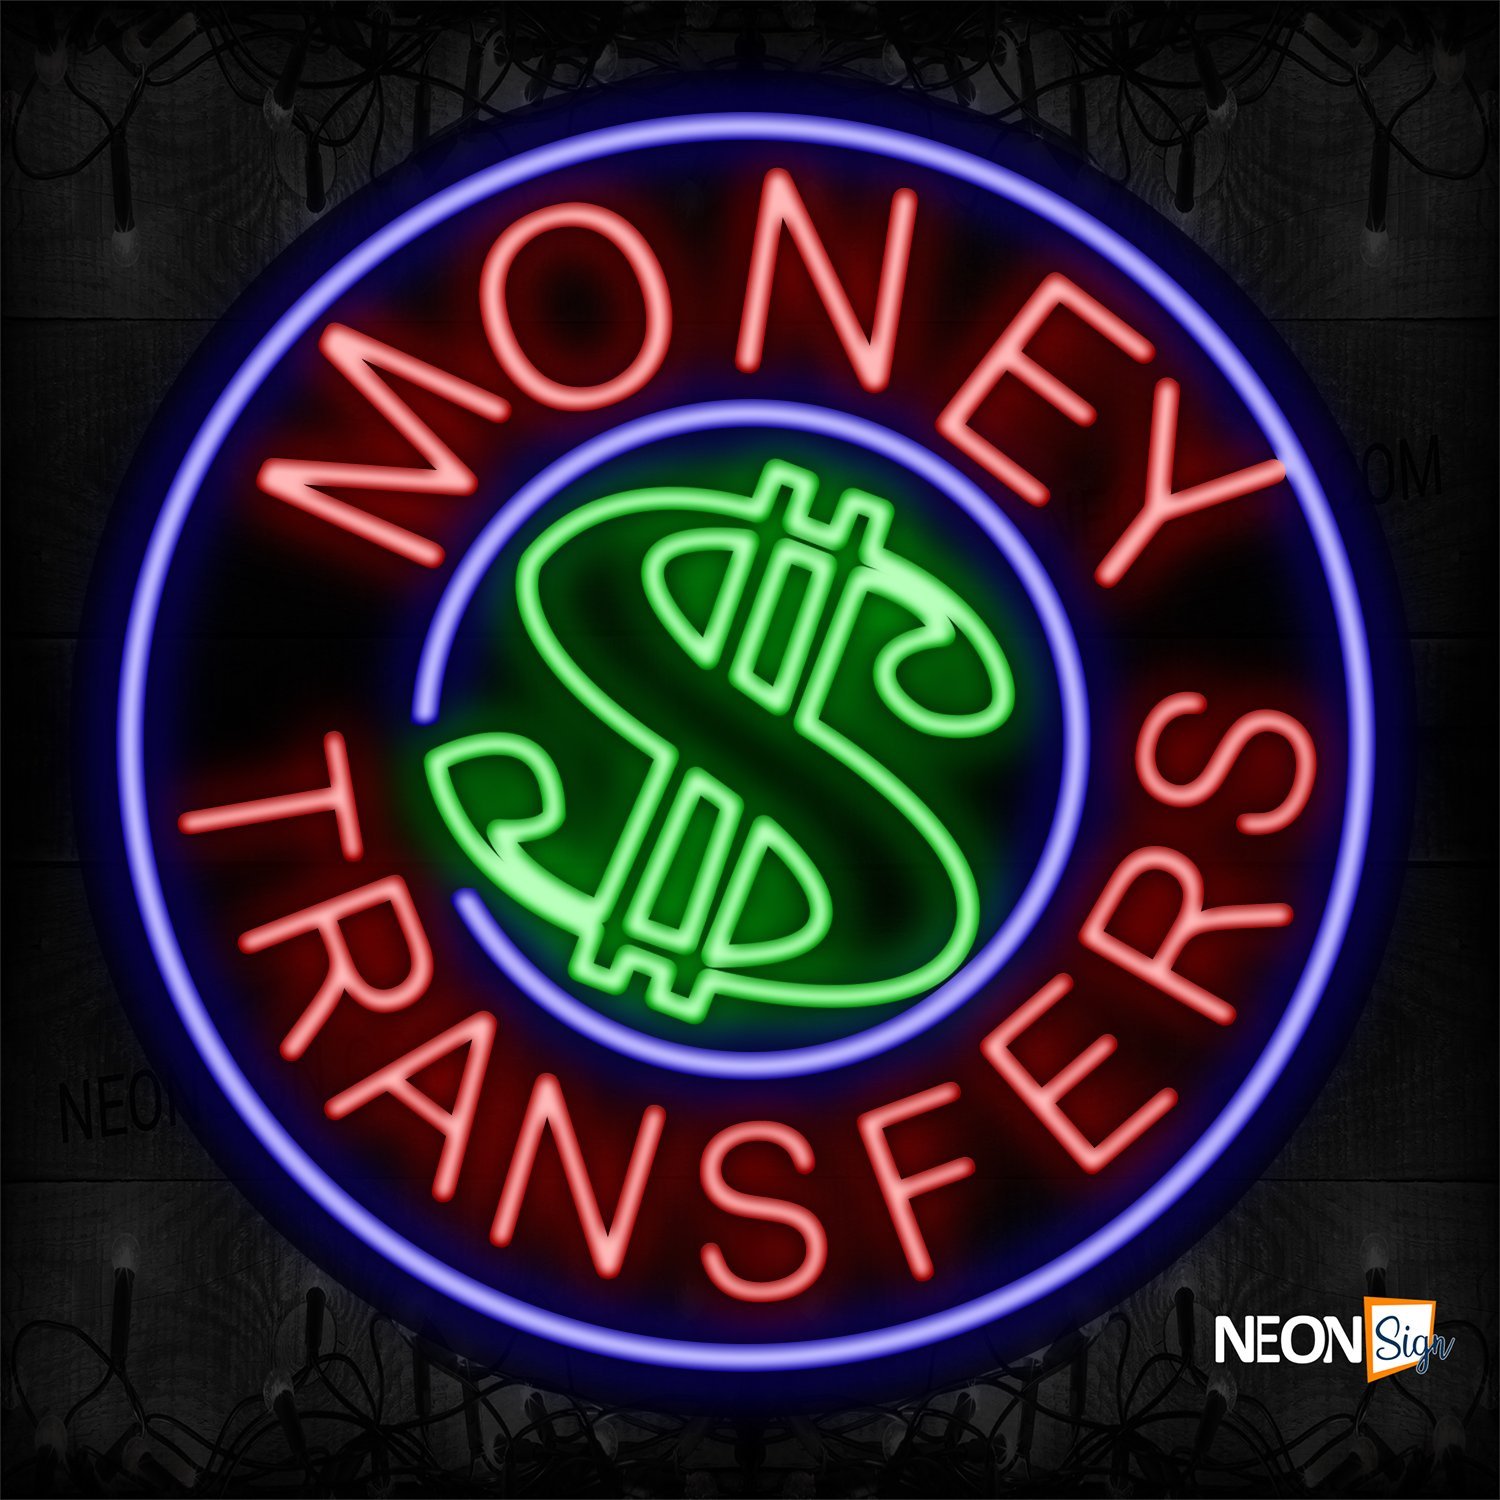 Image of 11330 Round Money Transfer Traditional Neon_26x26 Contoured Black Backing